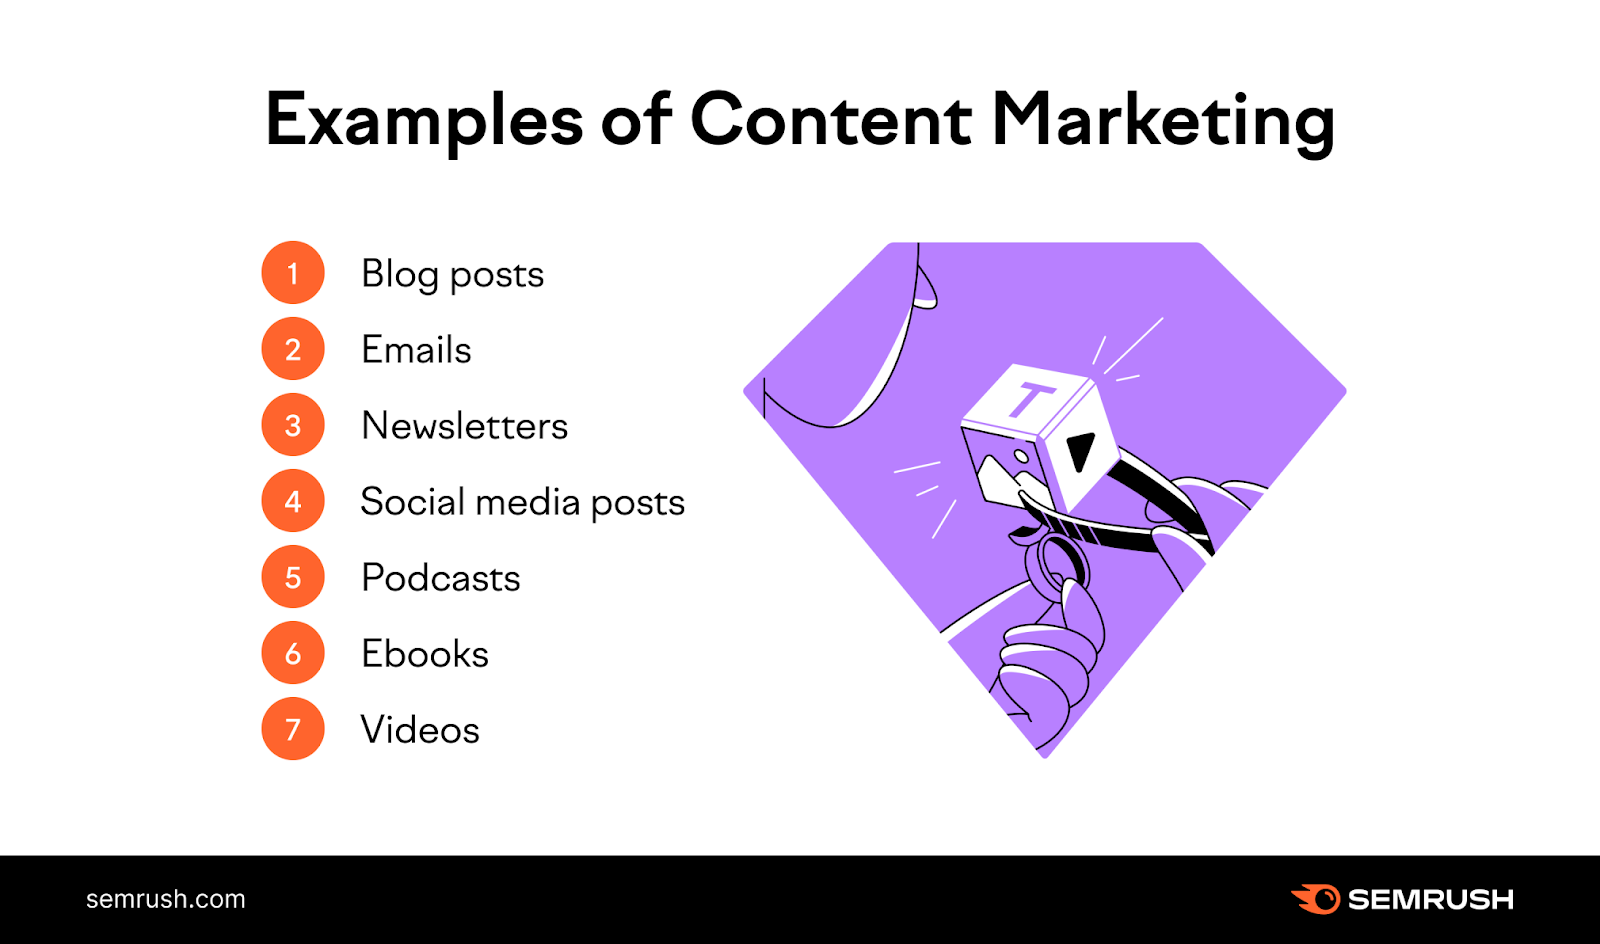 An image including examples of content marketing: blog posts, emails, newsletters, social media posts, podcasts, ebooks and videos